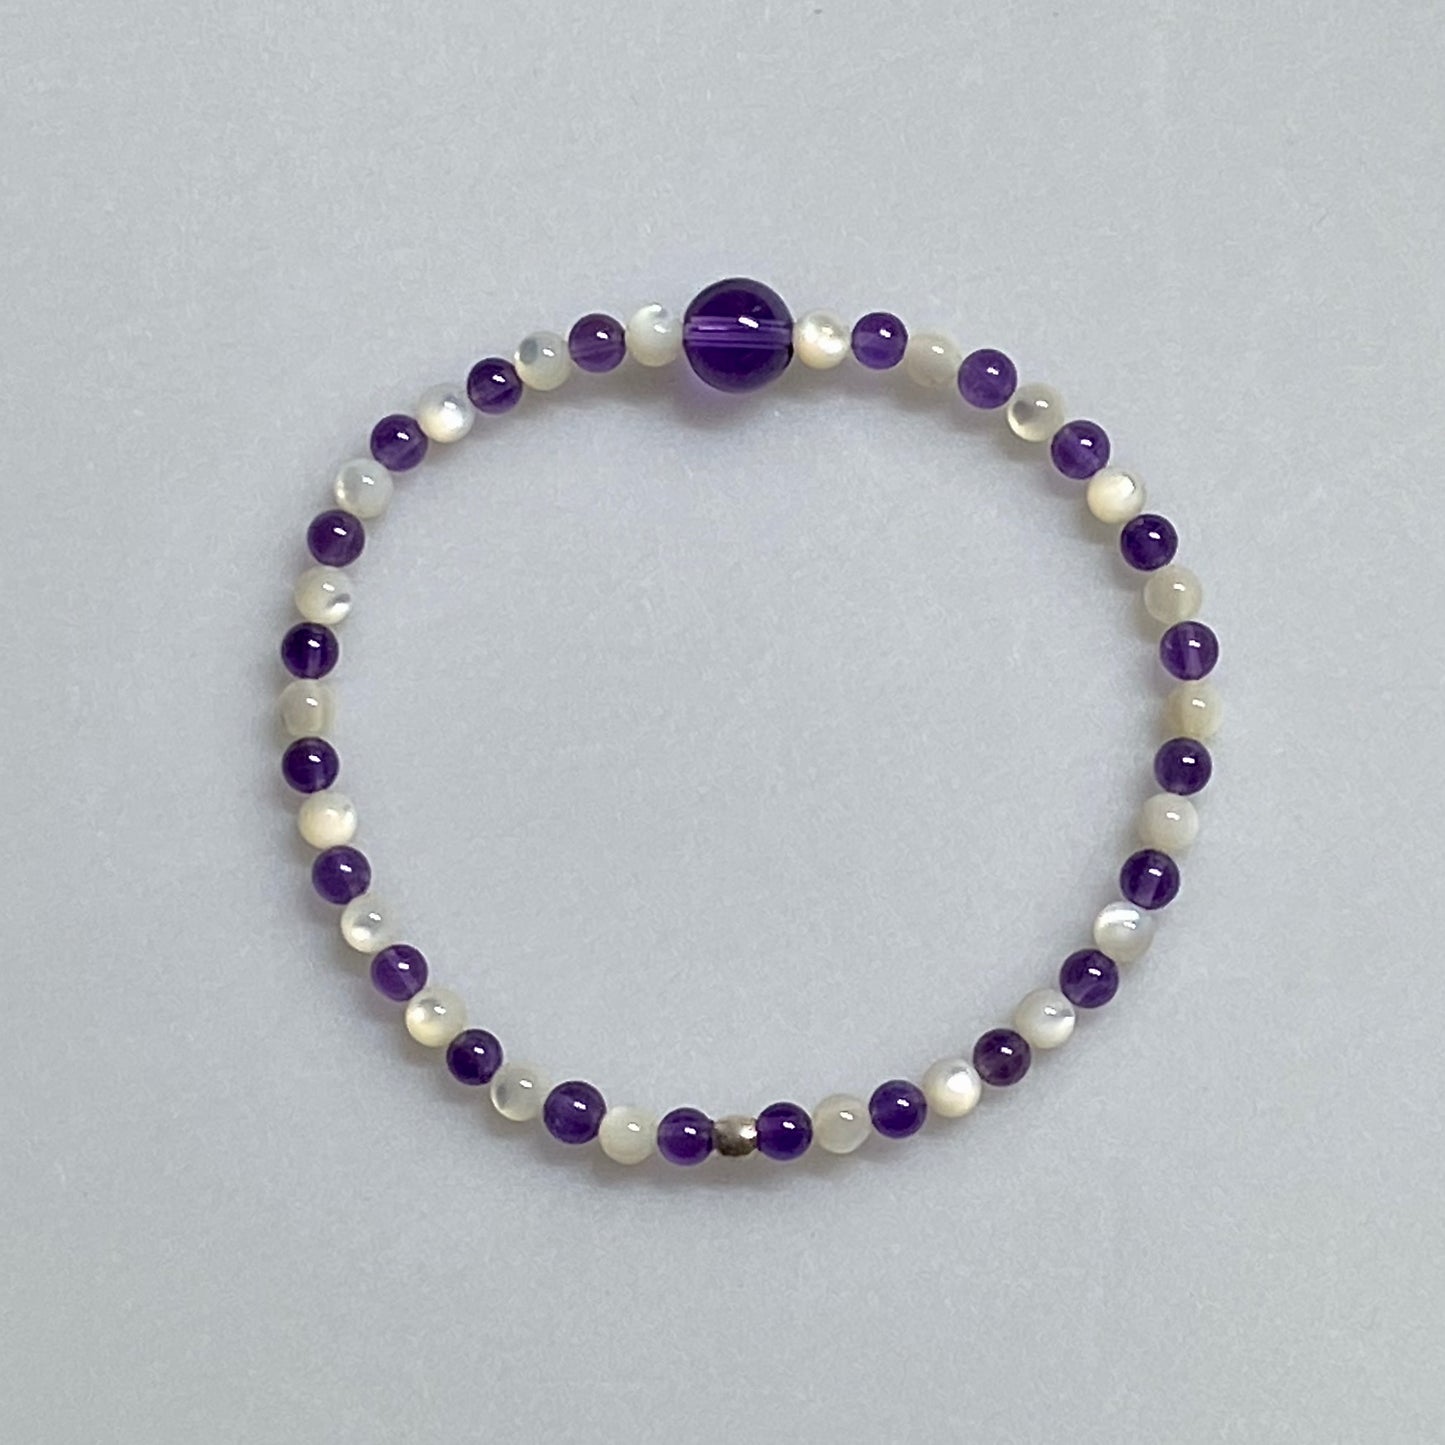 7-7/8" stretch Bracelet with Amethyst and Mother of Pearl Gemstone Beads